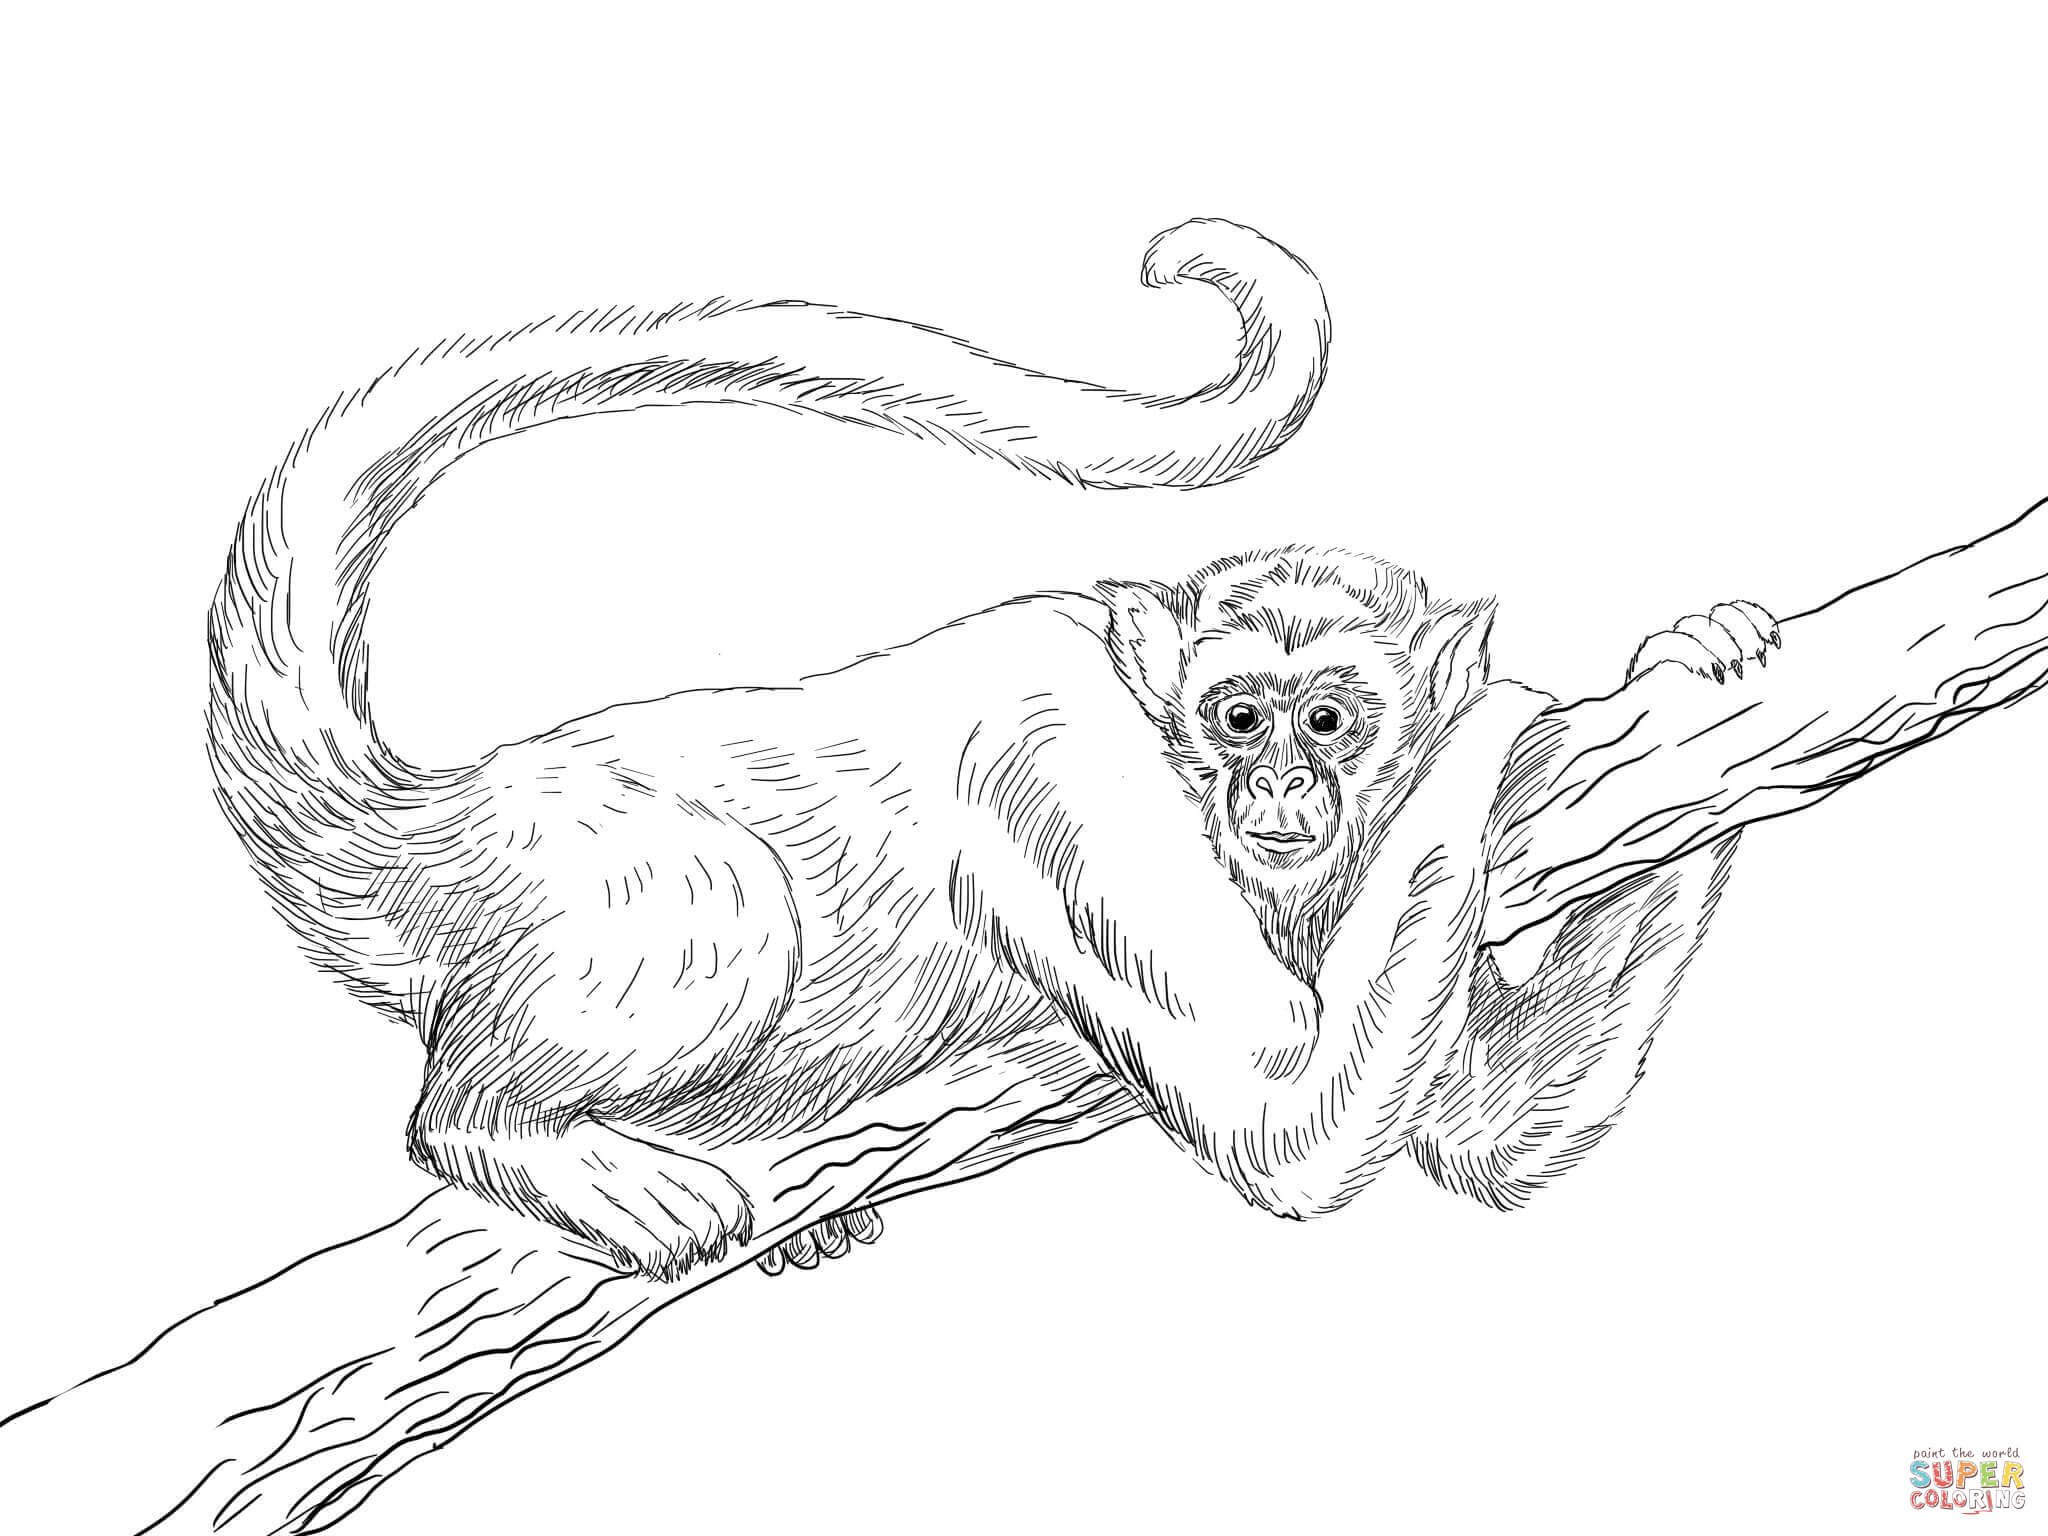 Spider Monkey coloring #13, Download drawings